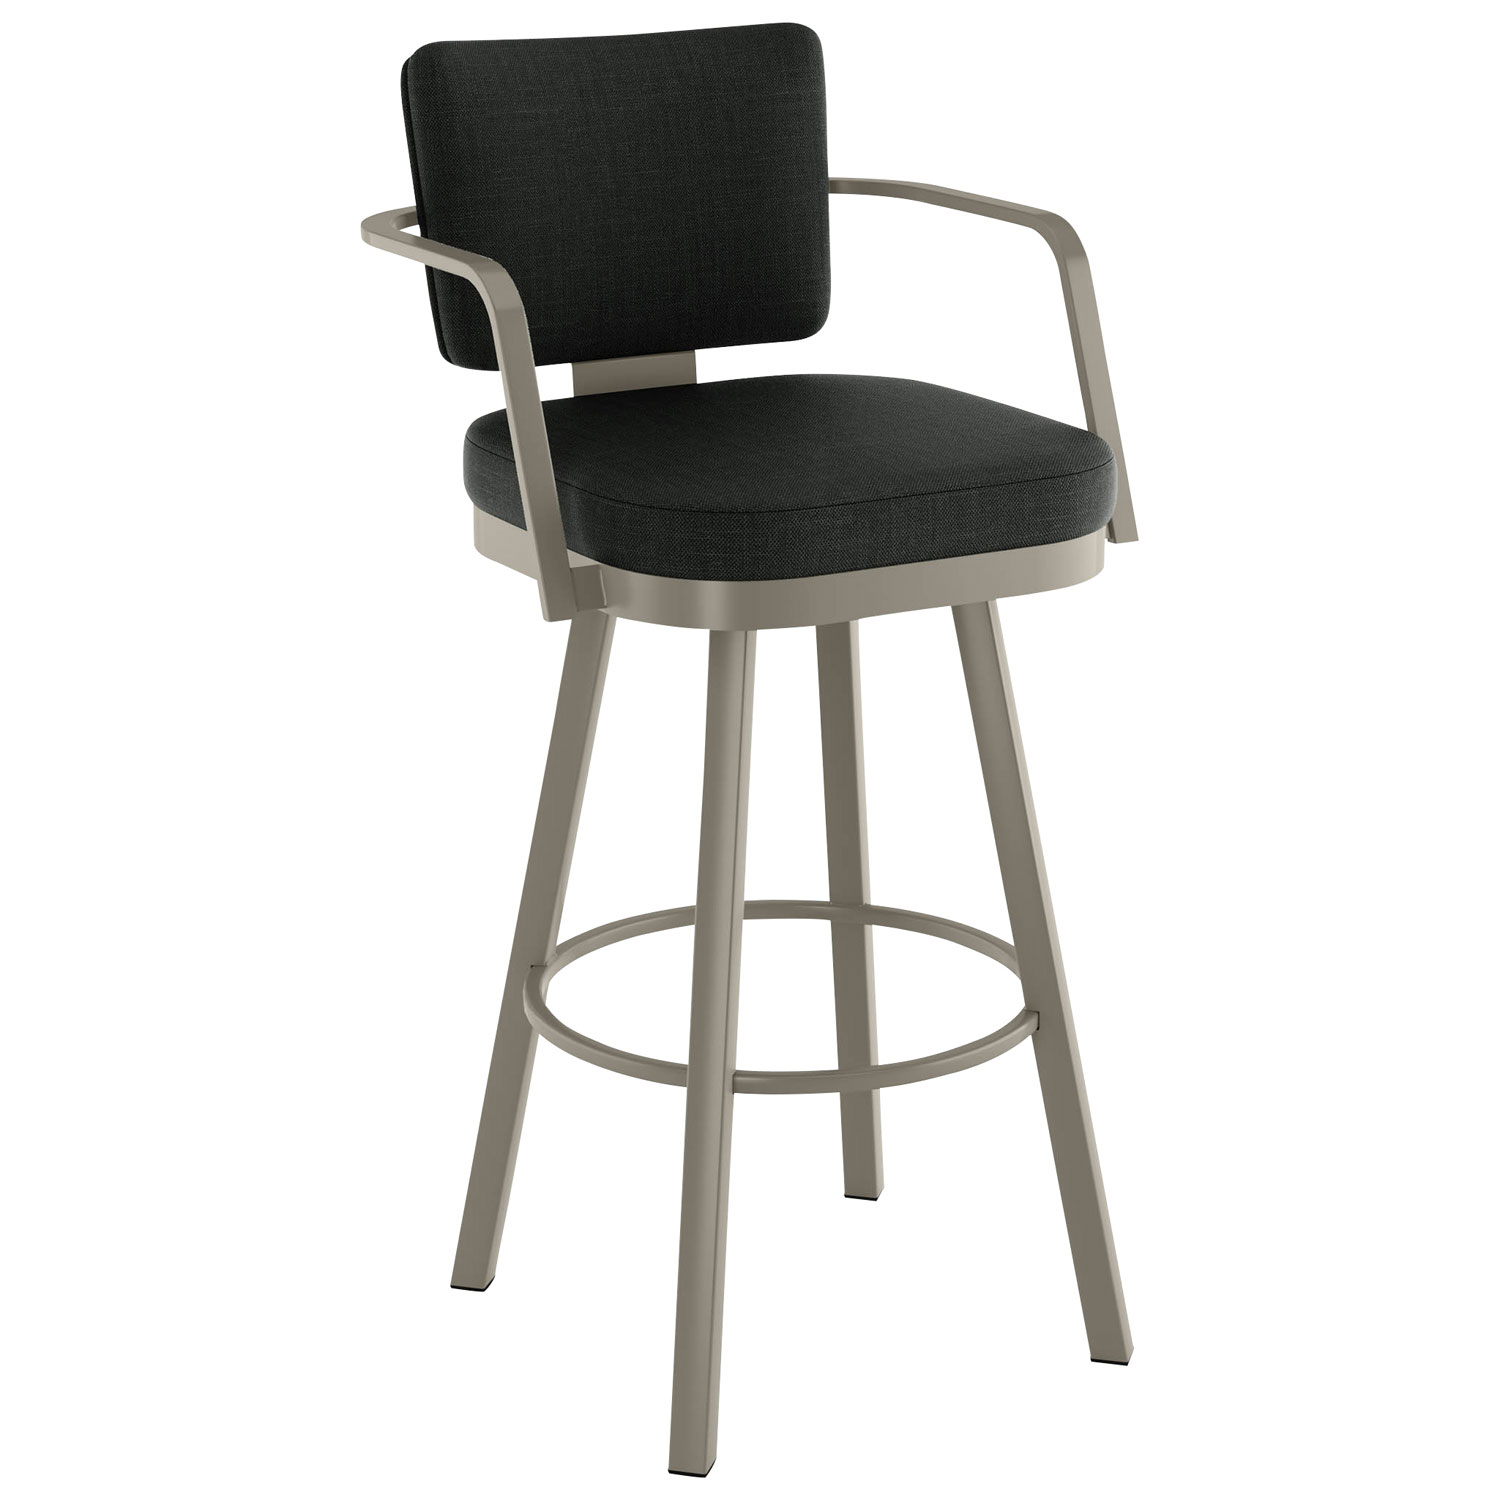 Thea Rustic Country Counter Height Barstool - Black/Grey